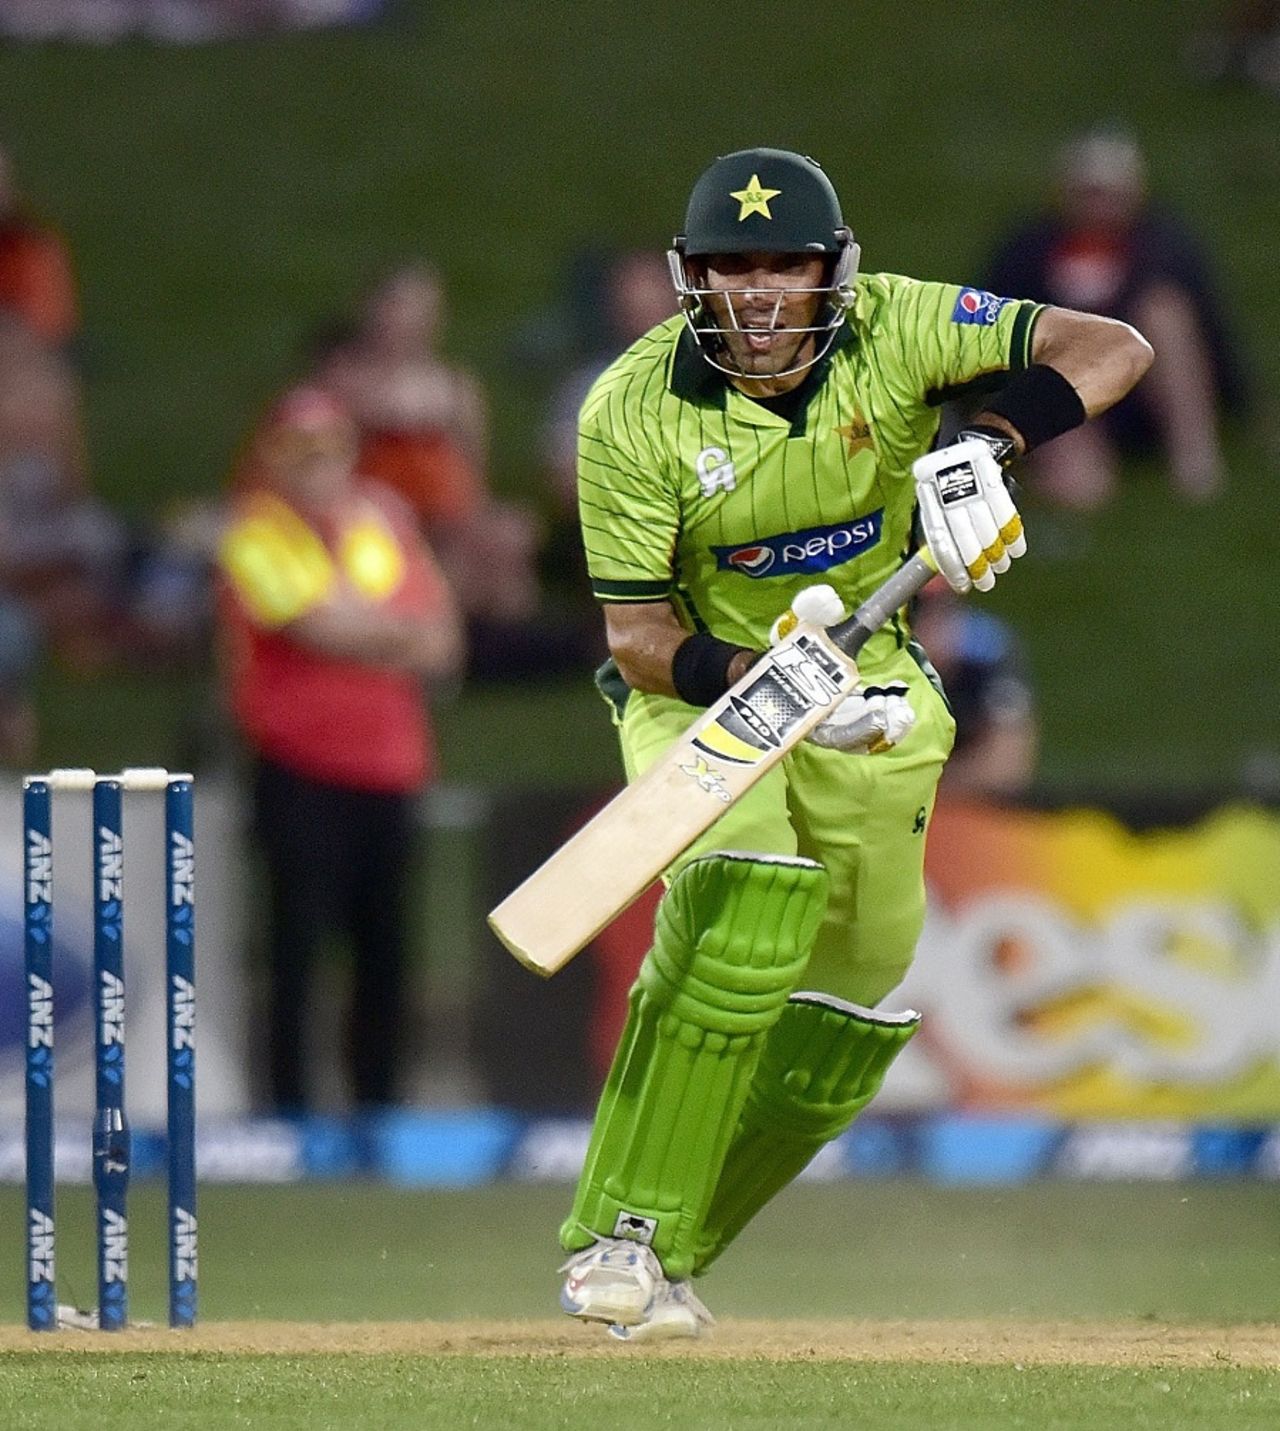 Misbah-ul-Haq made 45 off 51 balls before he was dismissed by Tim Southee, New Zealand v Pakistan, 2nd ODI, Napier, February 3, 2015